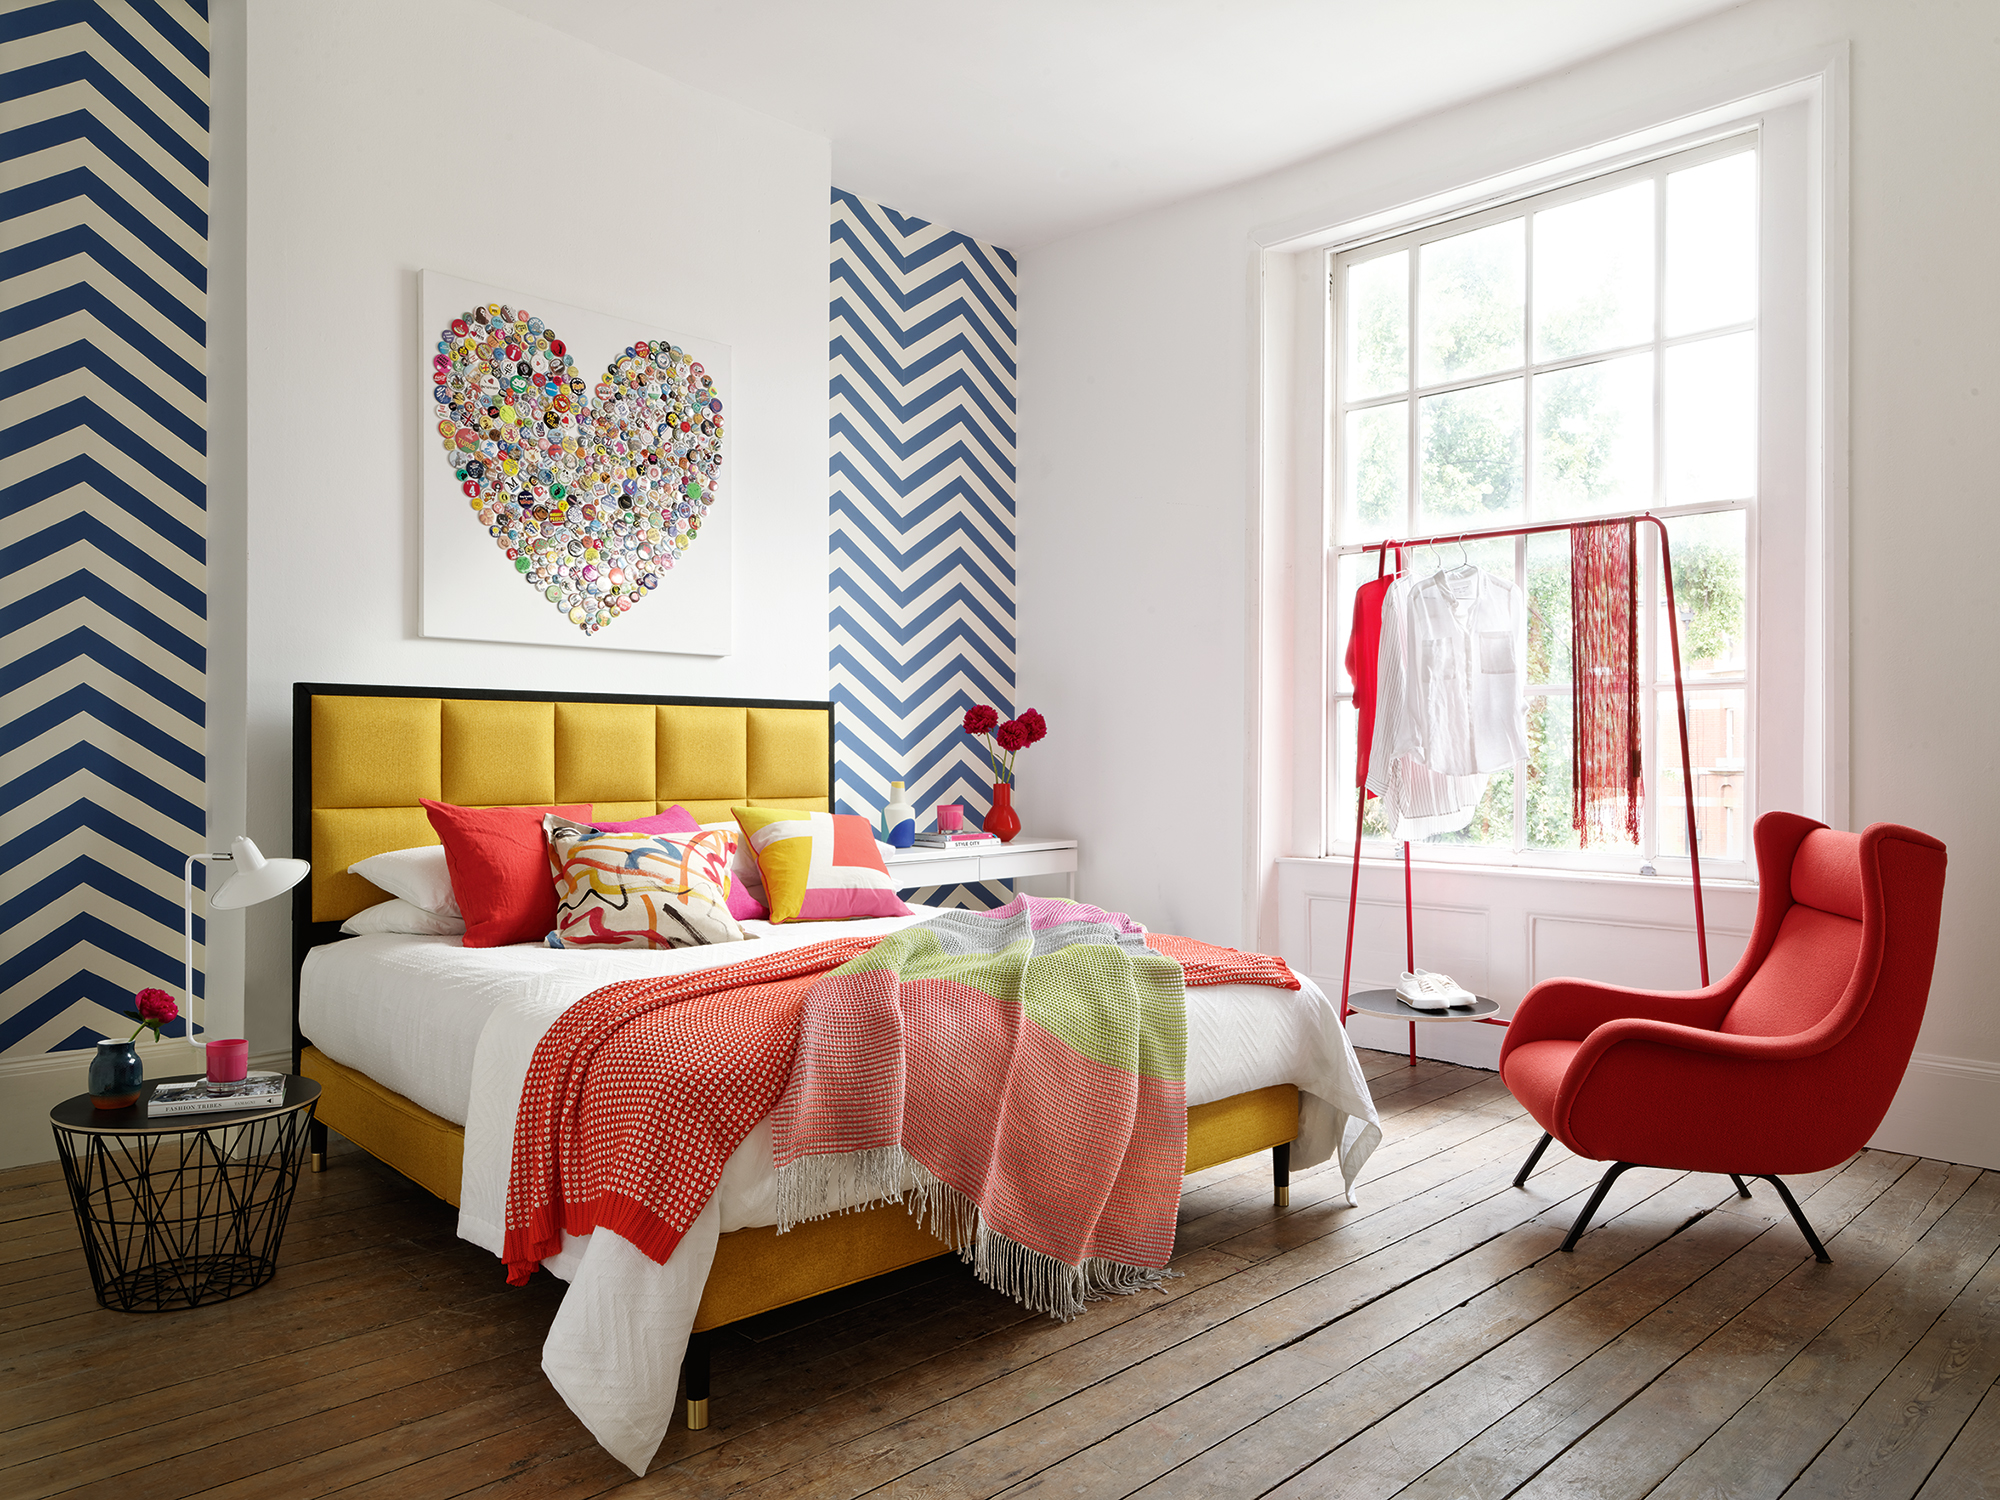 Bedroom with colourful patterns and bed with yellow bedframe